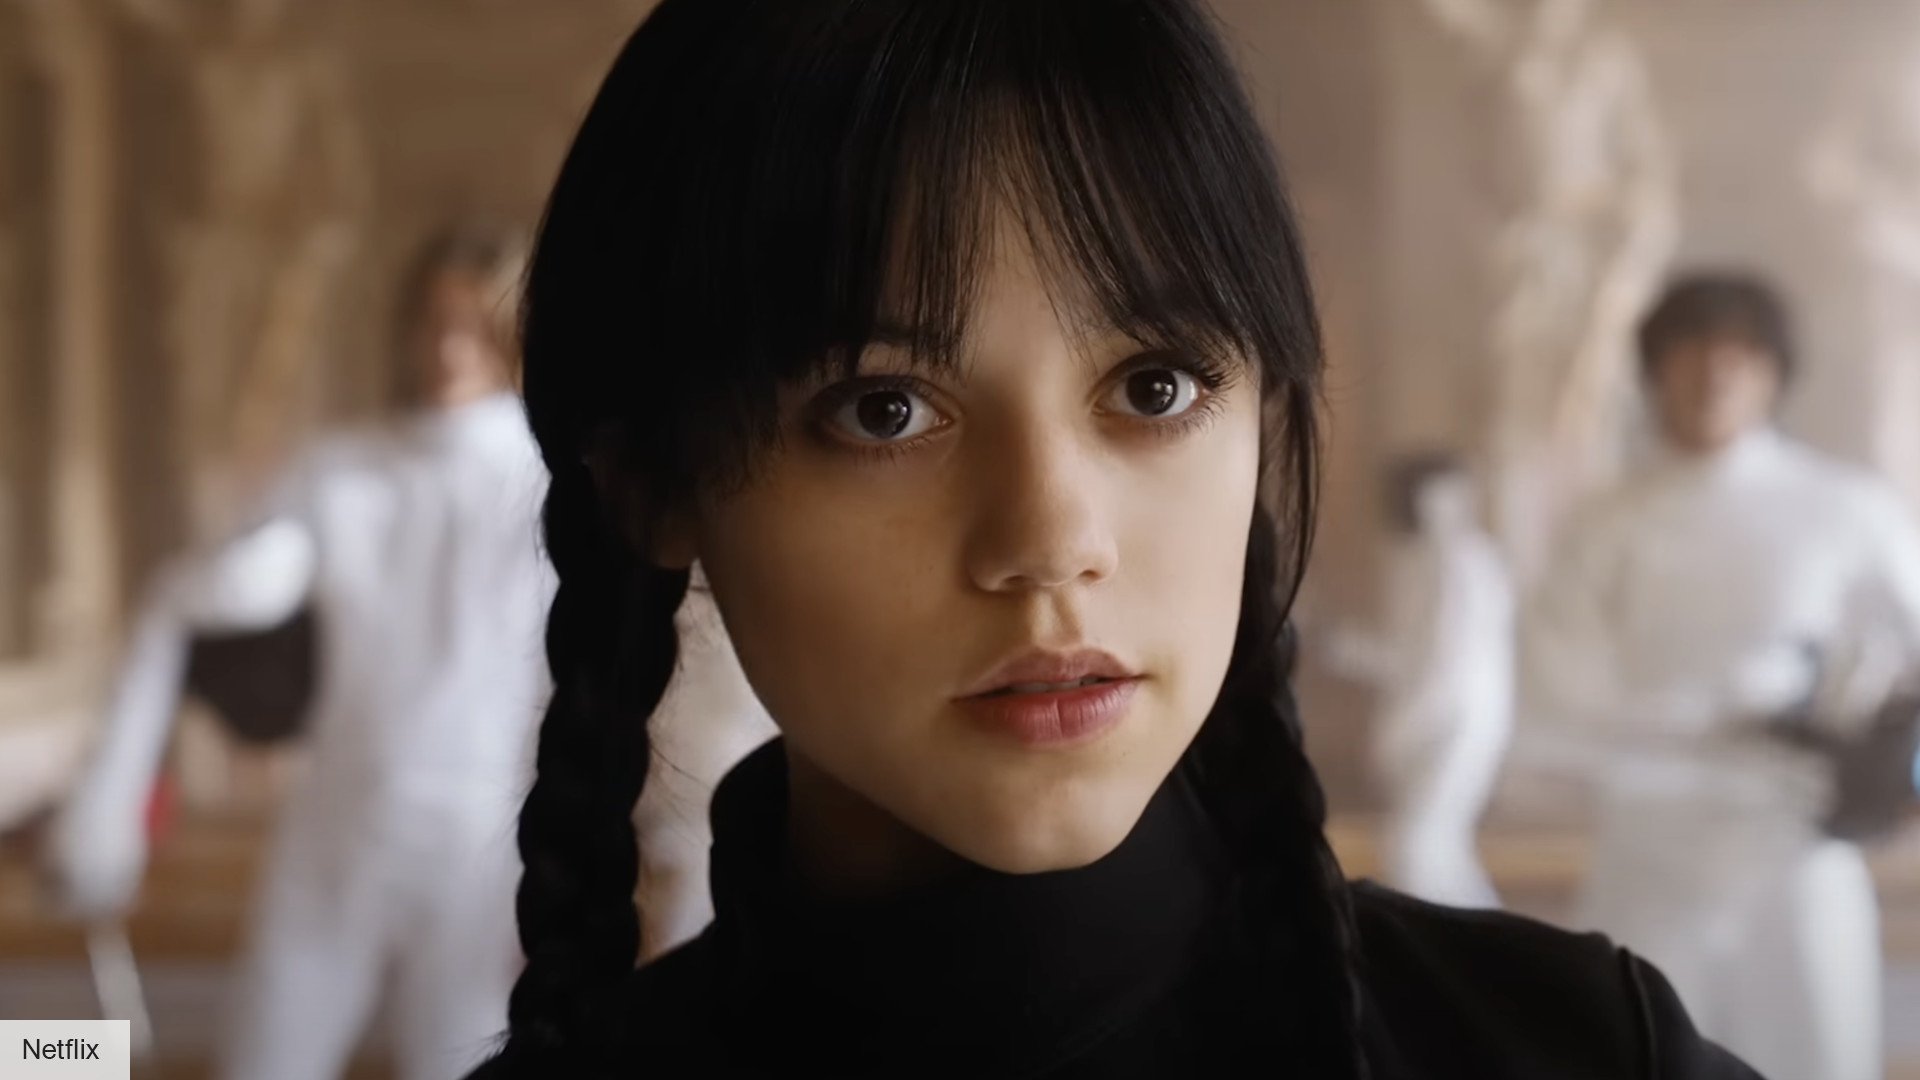 Why is Wednesday Addams having visions in the Netflix series?